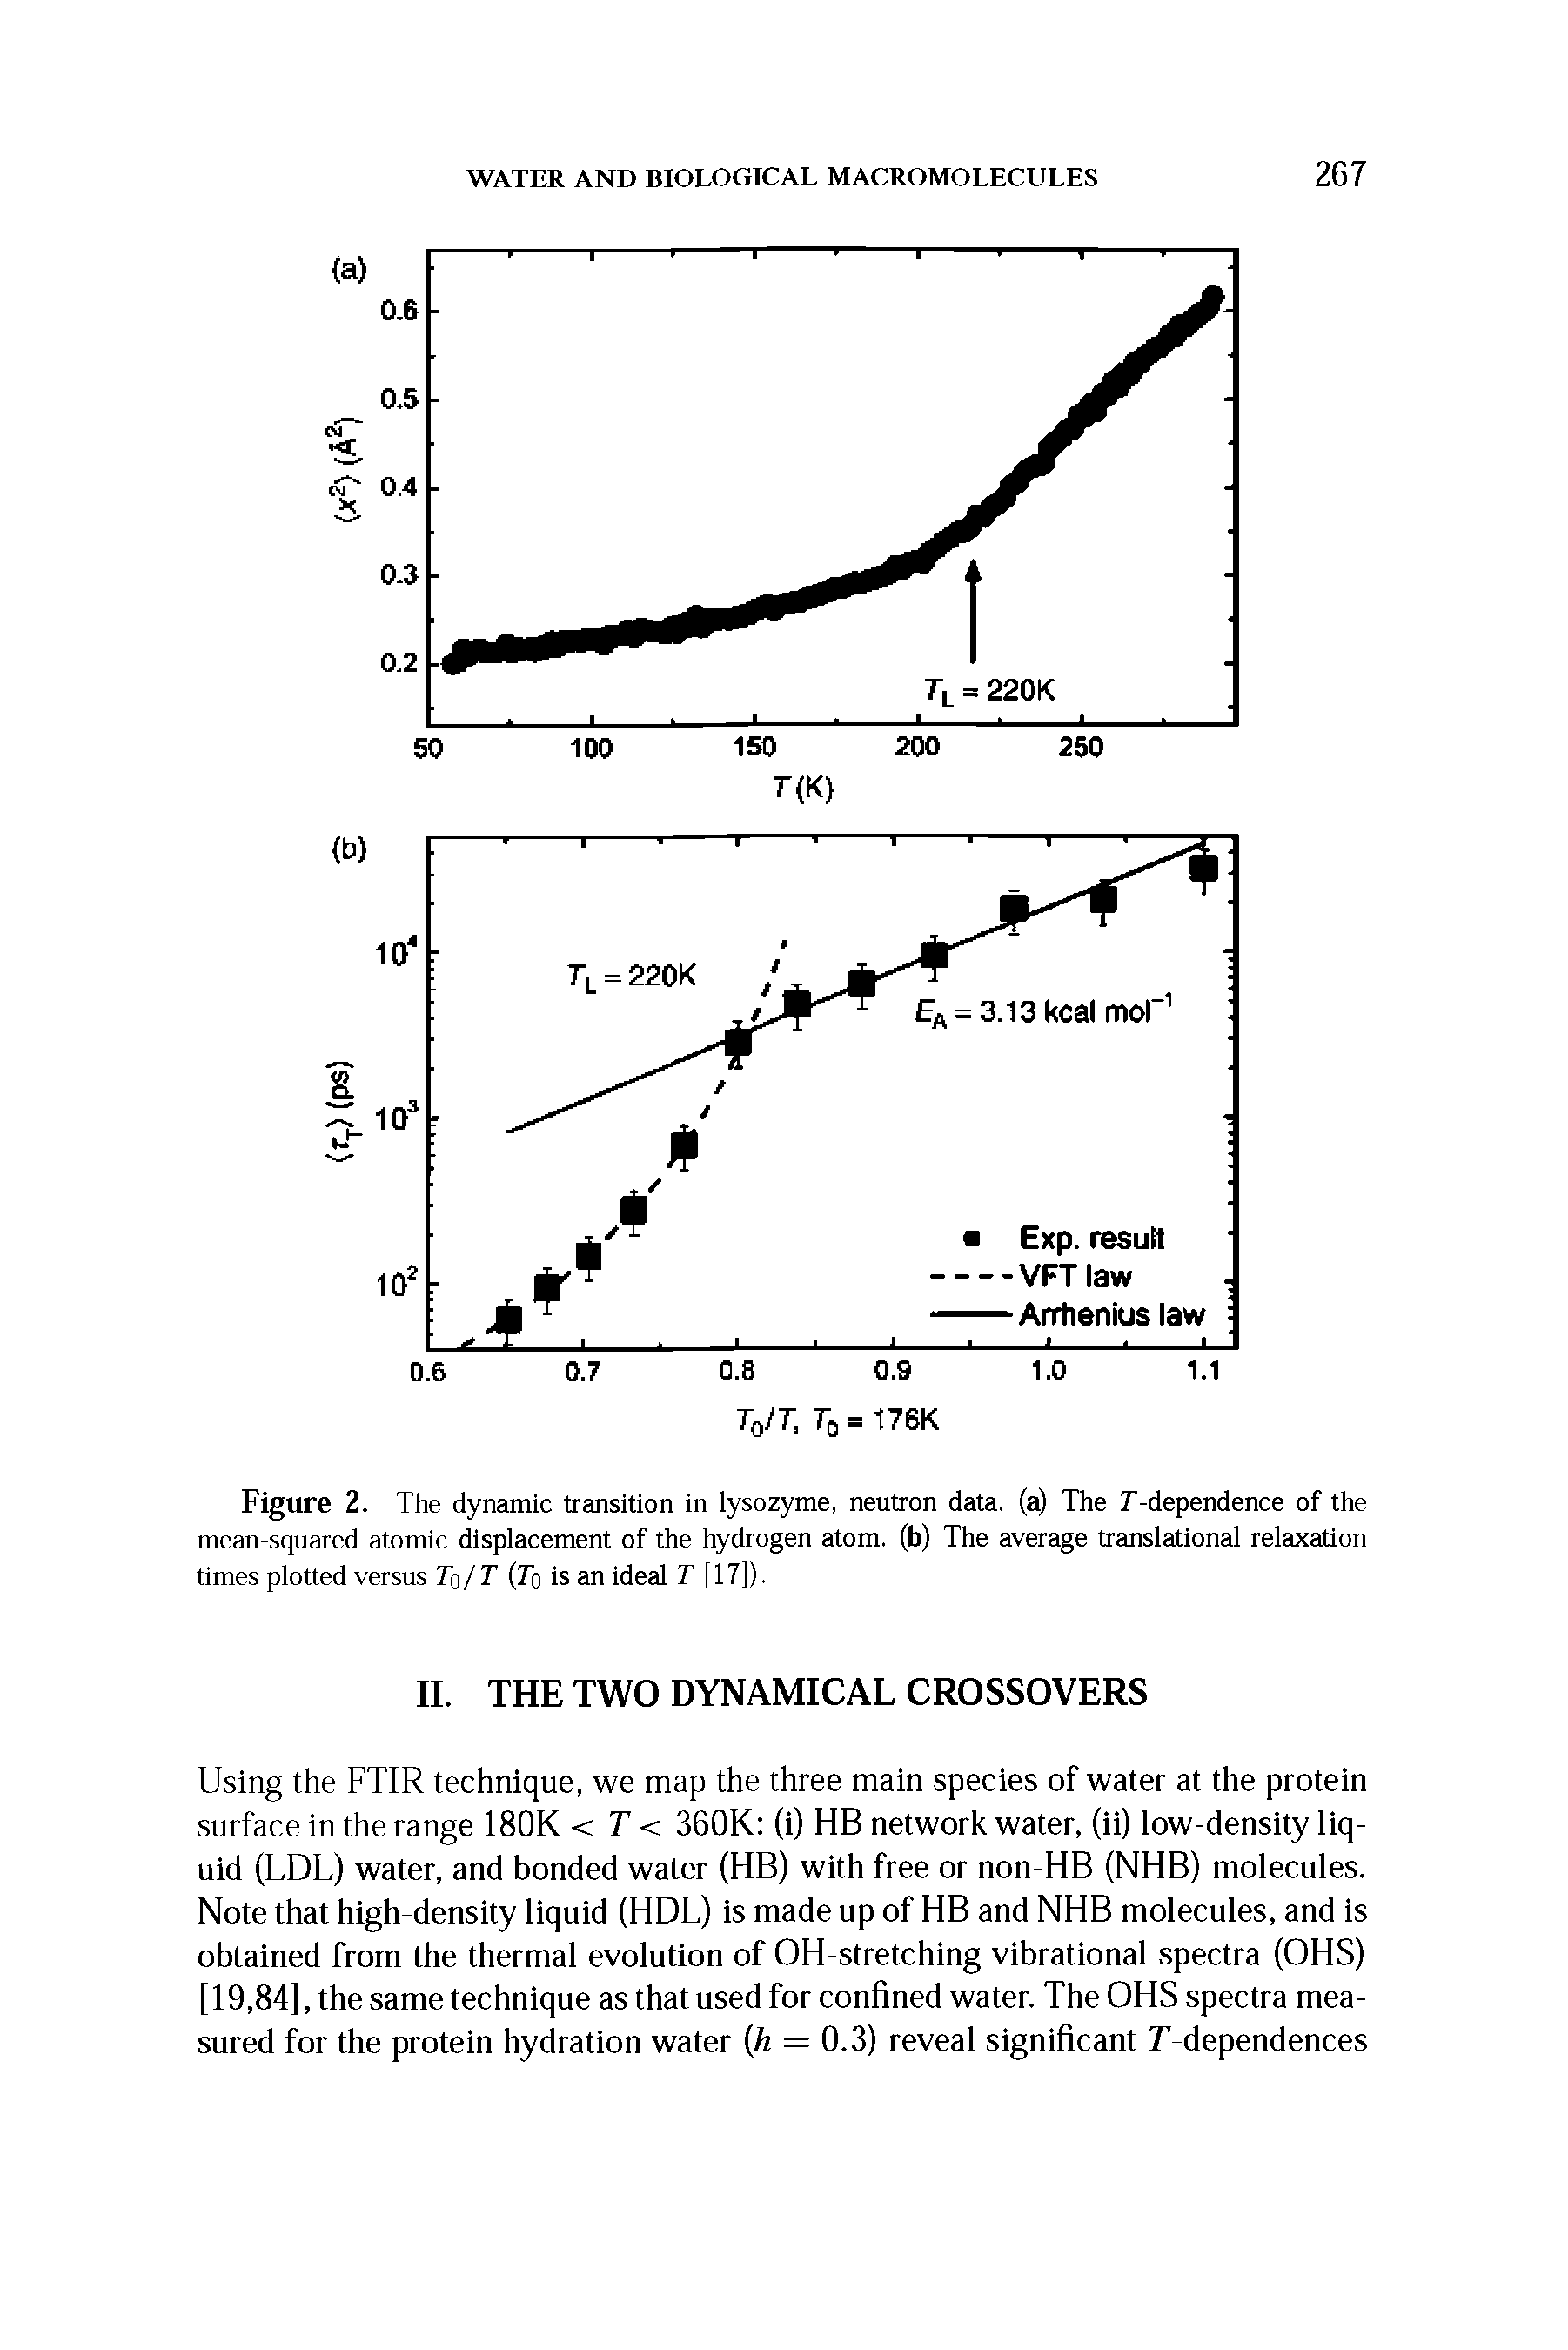 Figure 2. The dynamic transition in lysozyme, neutron data. (sO The T-dependence of the mean-squared atomic displacement of the hydrogen atom, (b) The average translational relaxation times plotted versus Ta/T (To is an ideal T [17]).